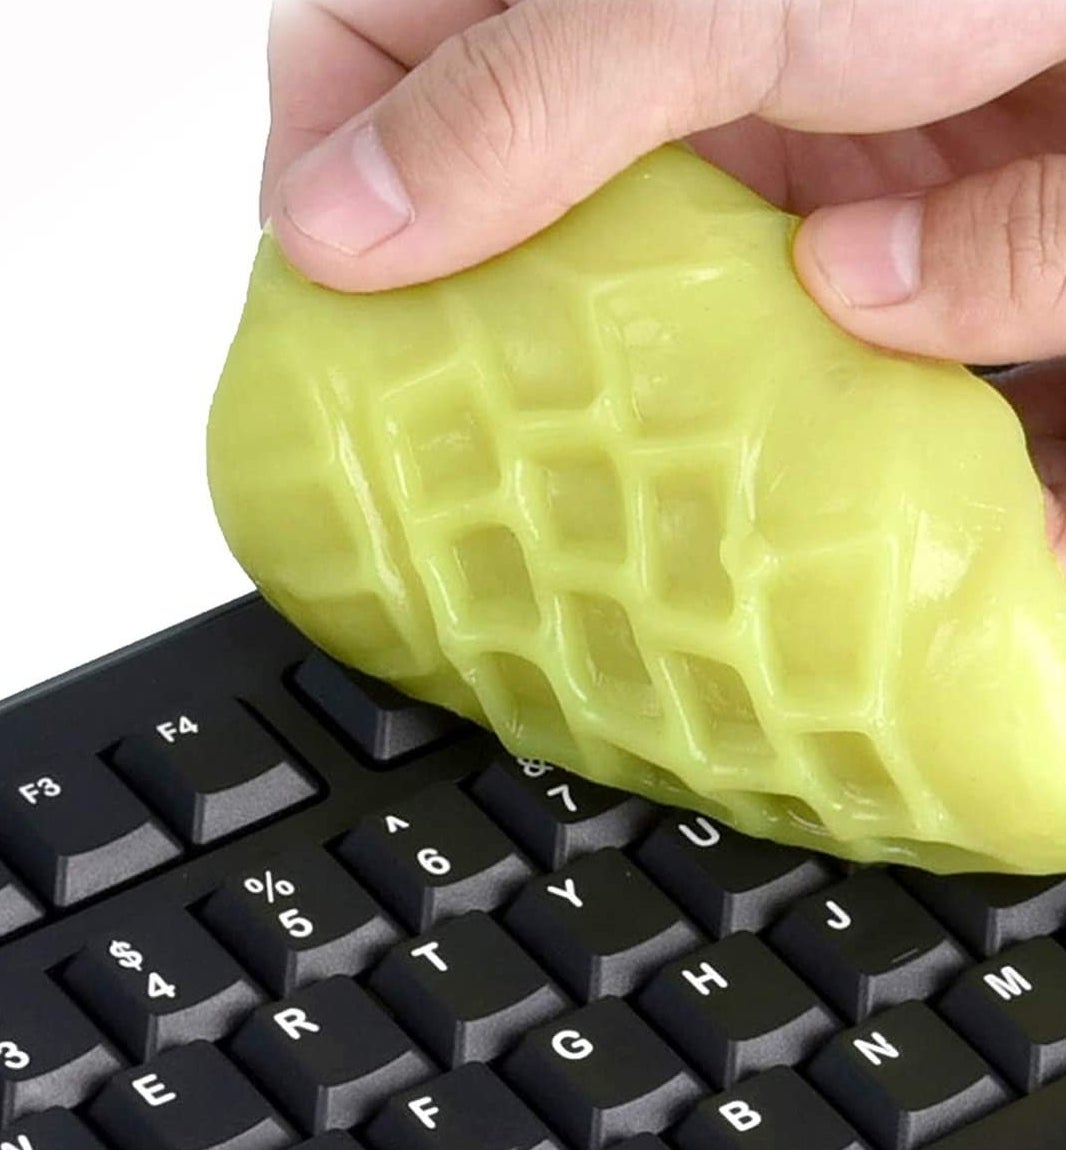 A person cleaning their keyboard with the cleaning putty